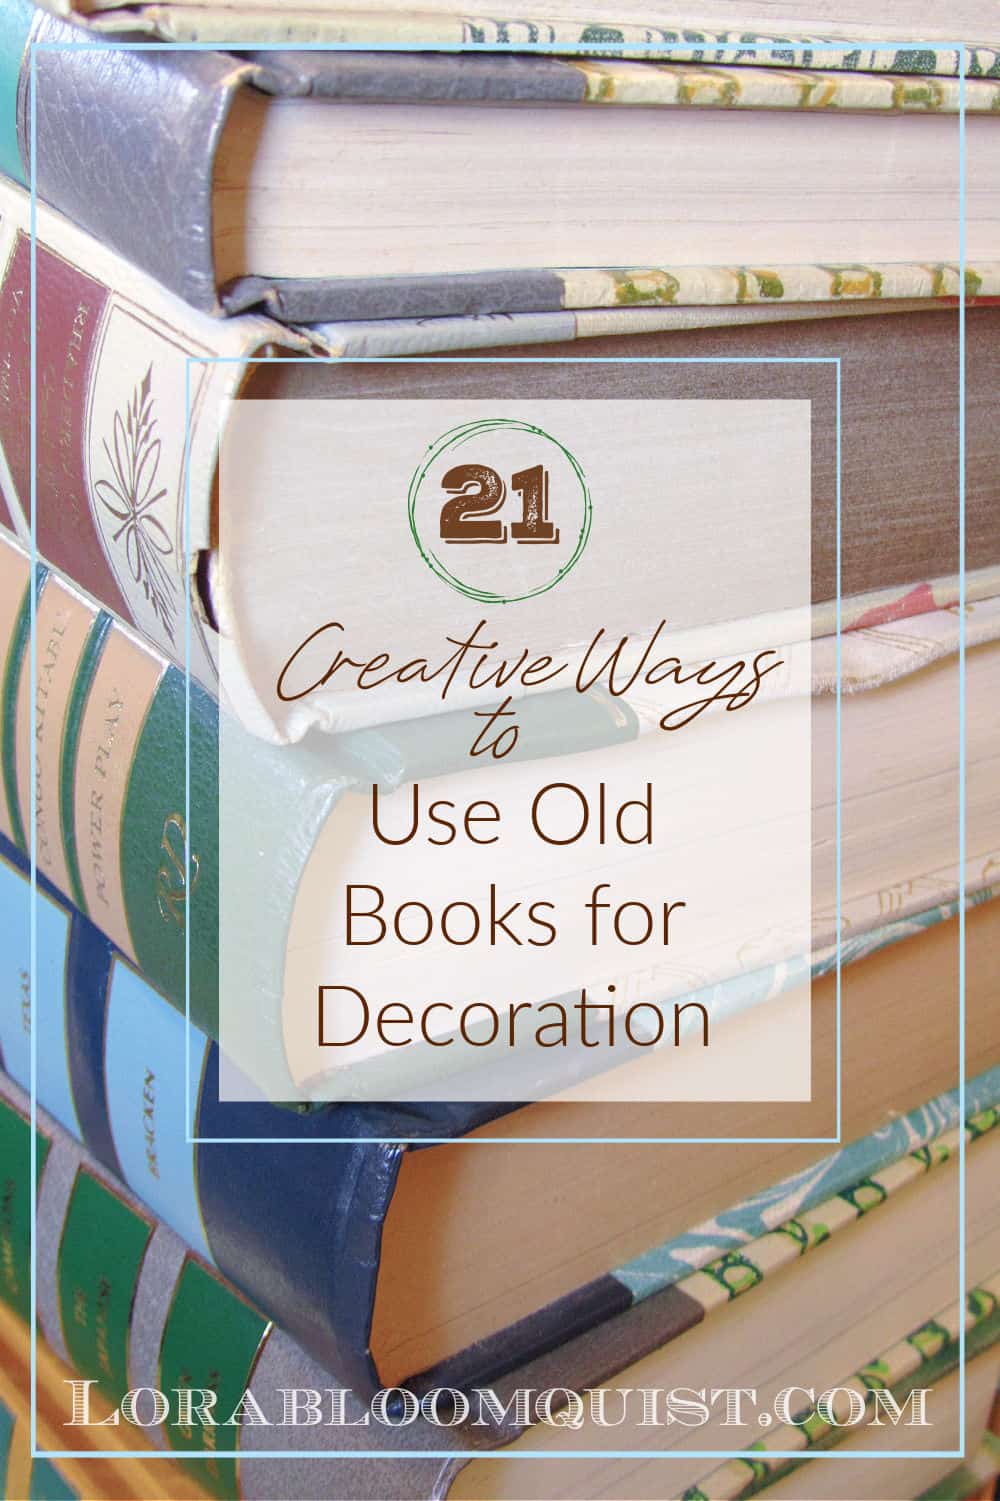 Decorating with Books: 21 Creative Ways to Use Old Books for Decoration